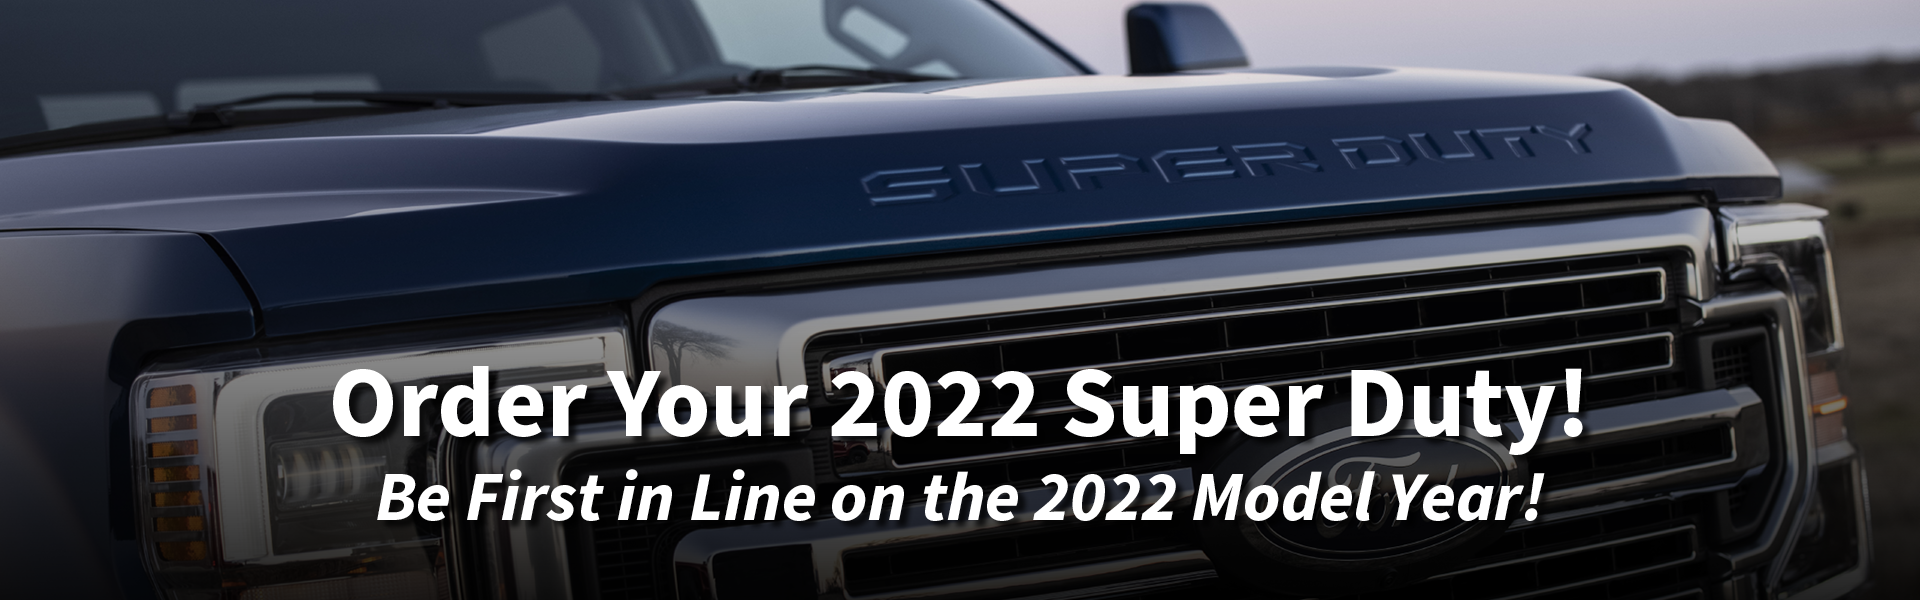 Be first in line with your 2022 Super Duty Order